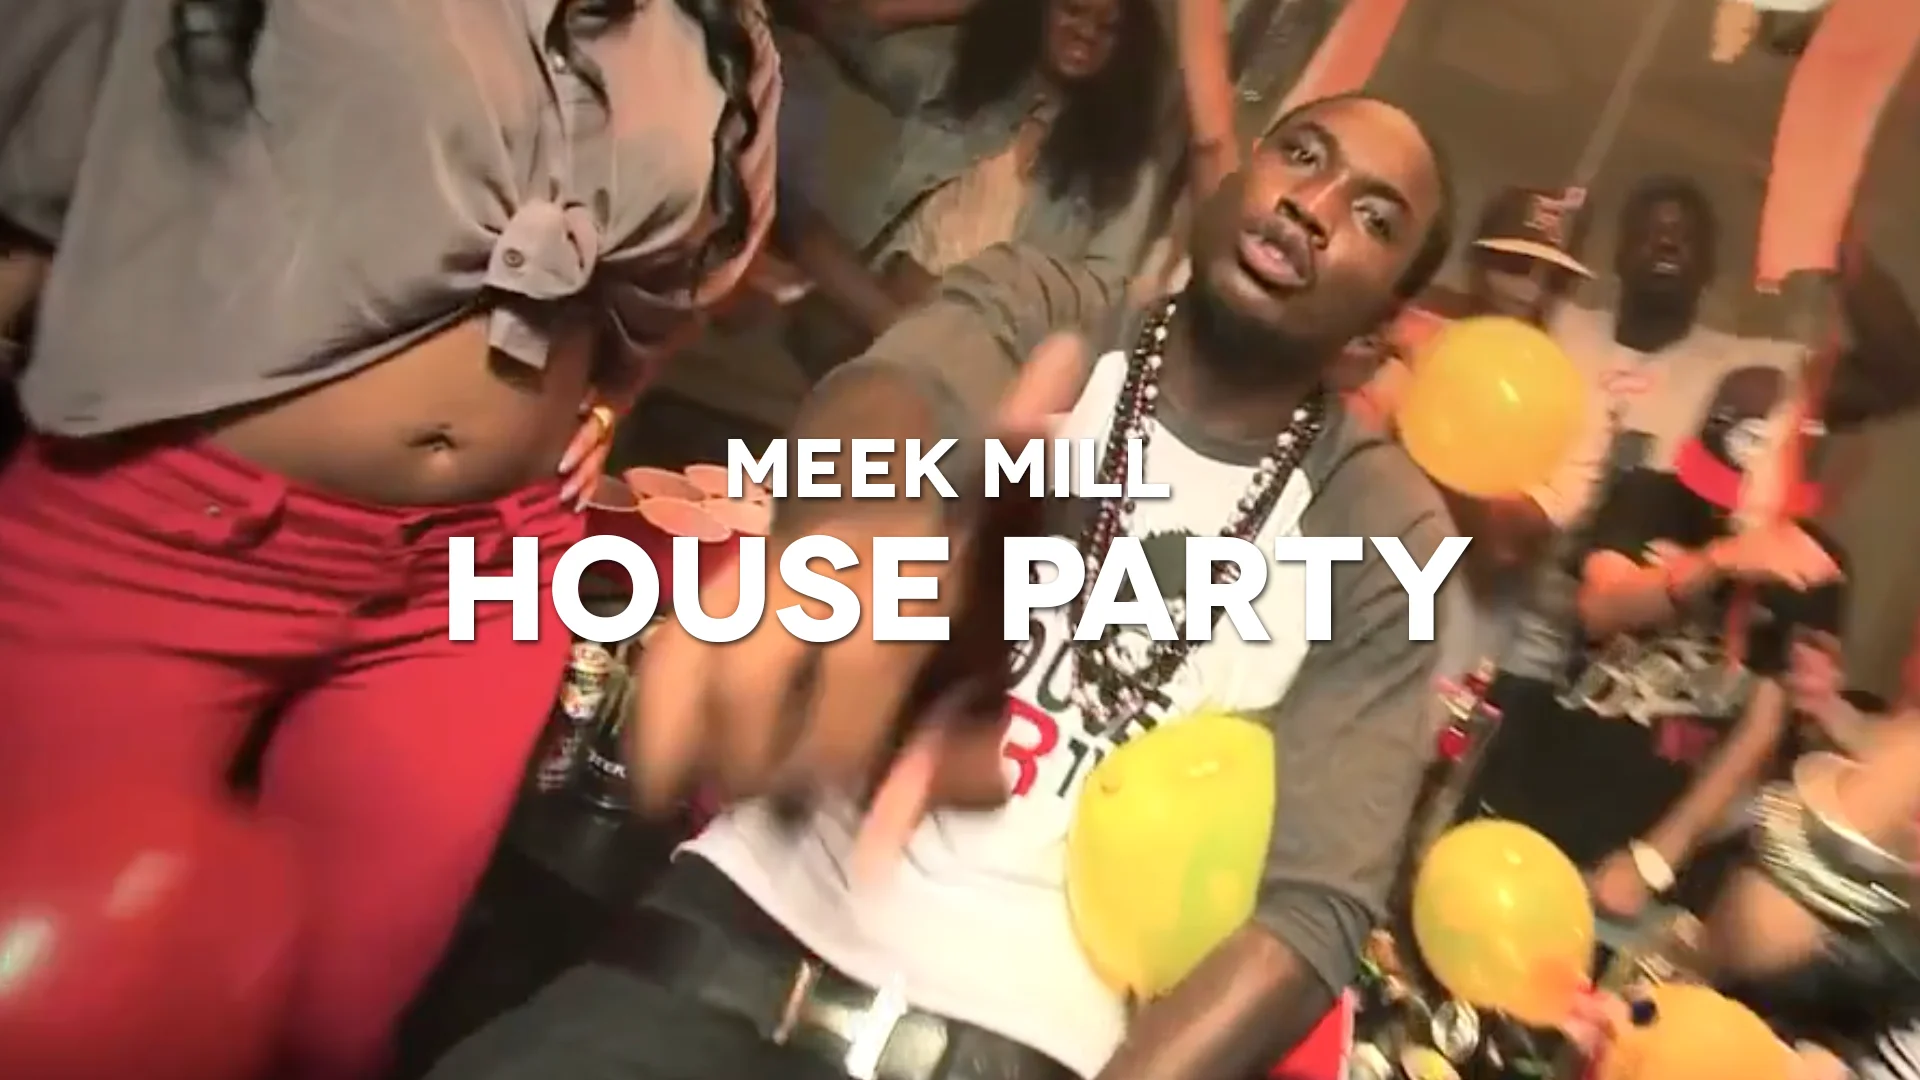 meek mill - house party on Vimeo